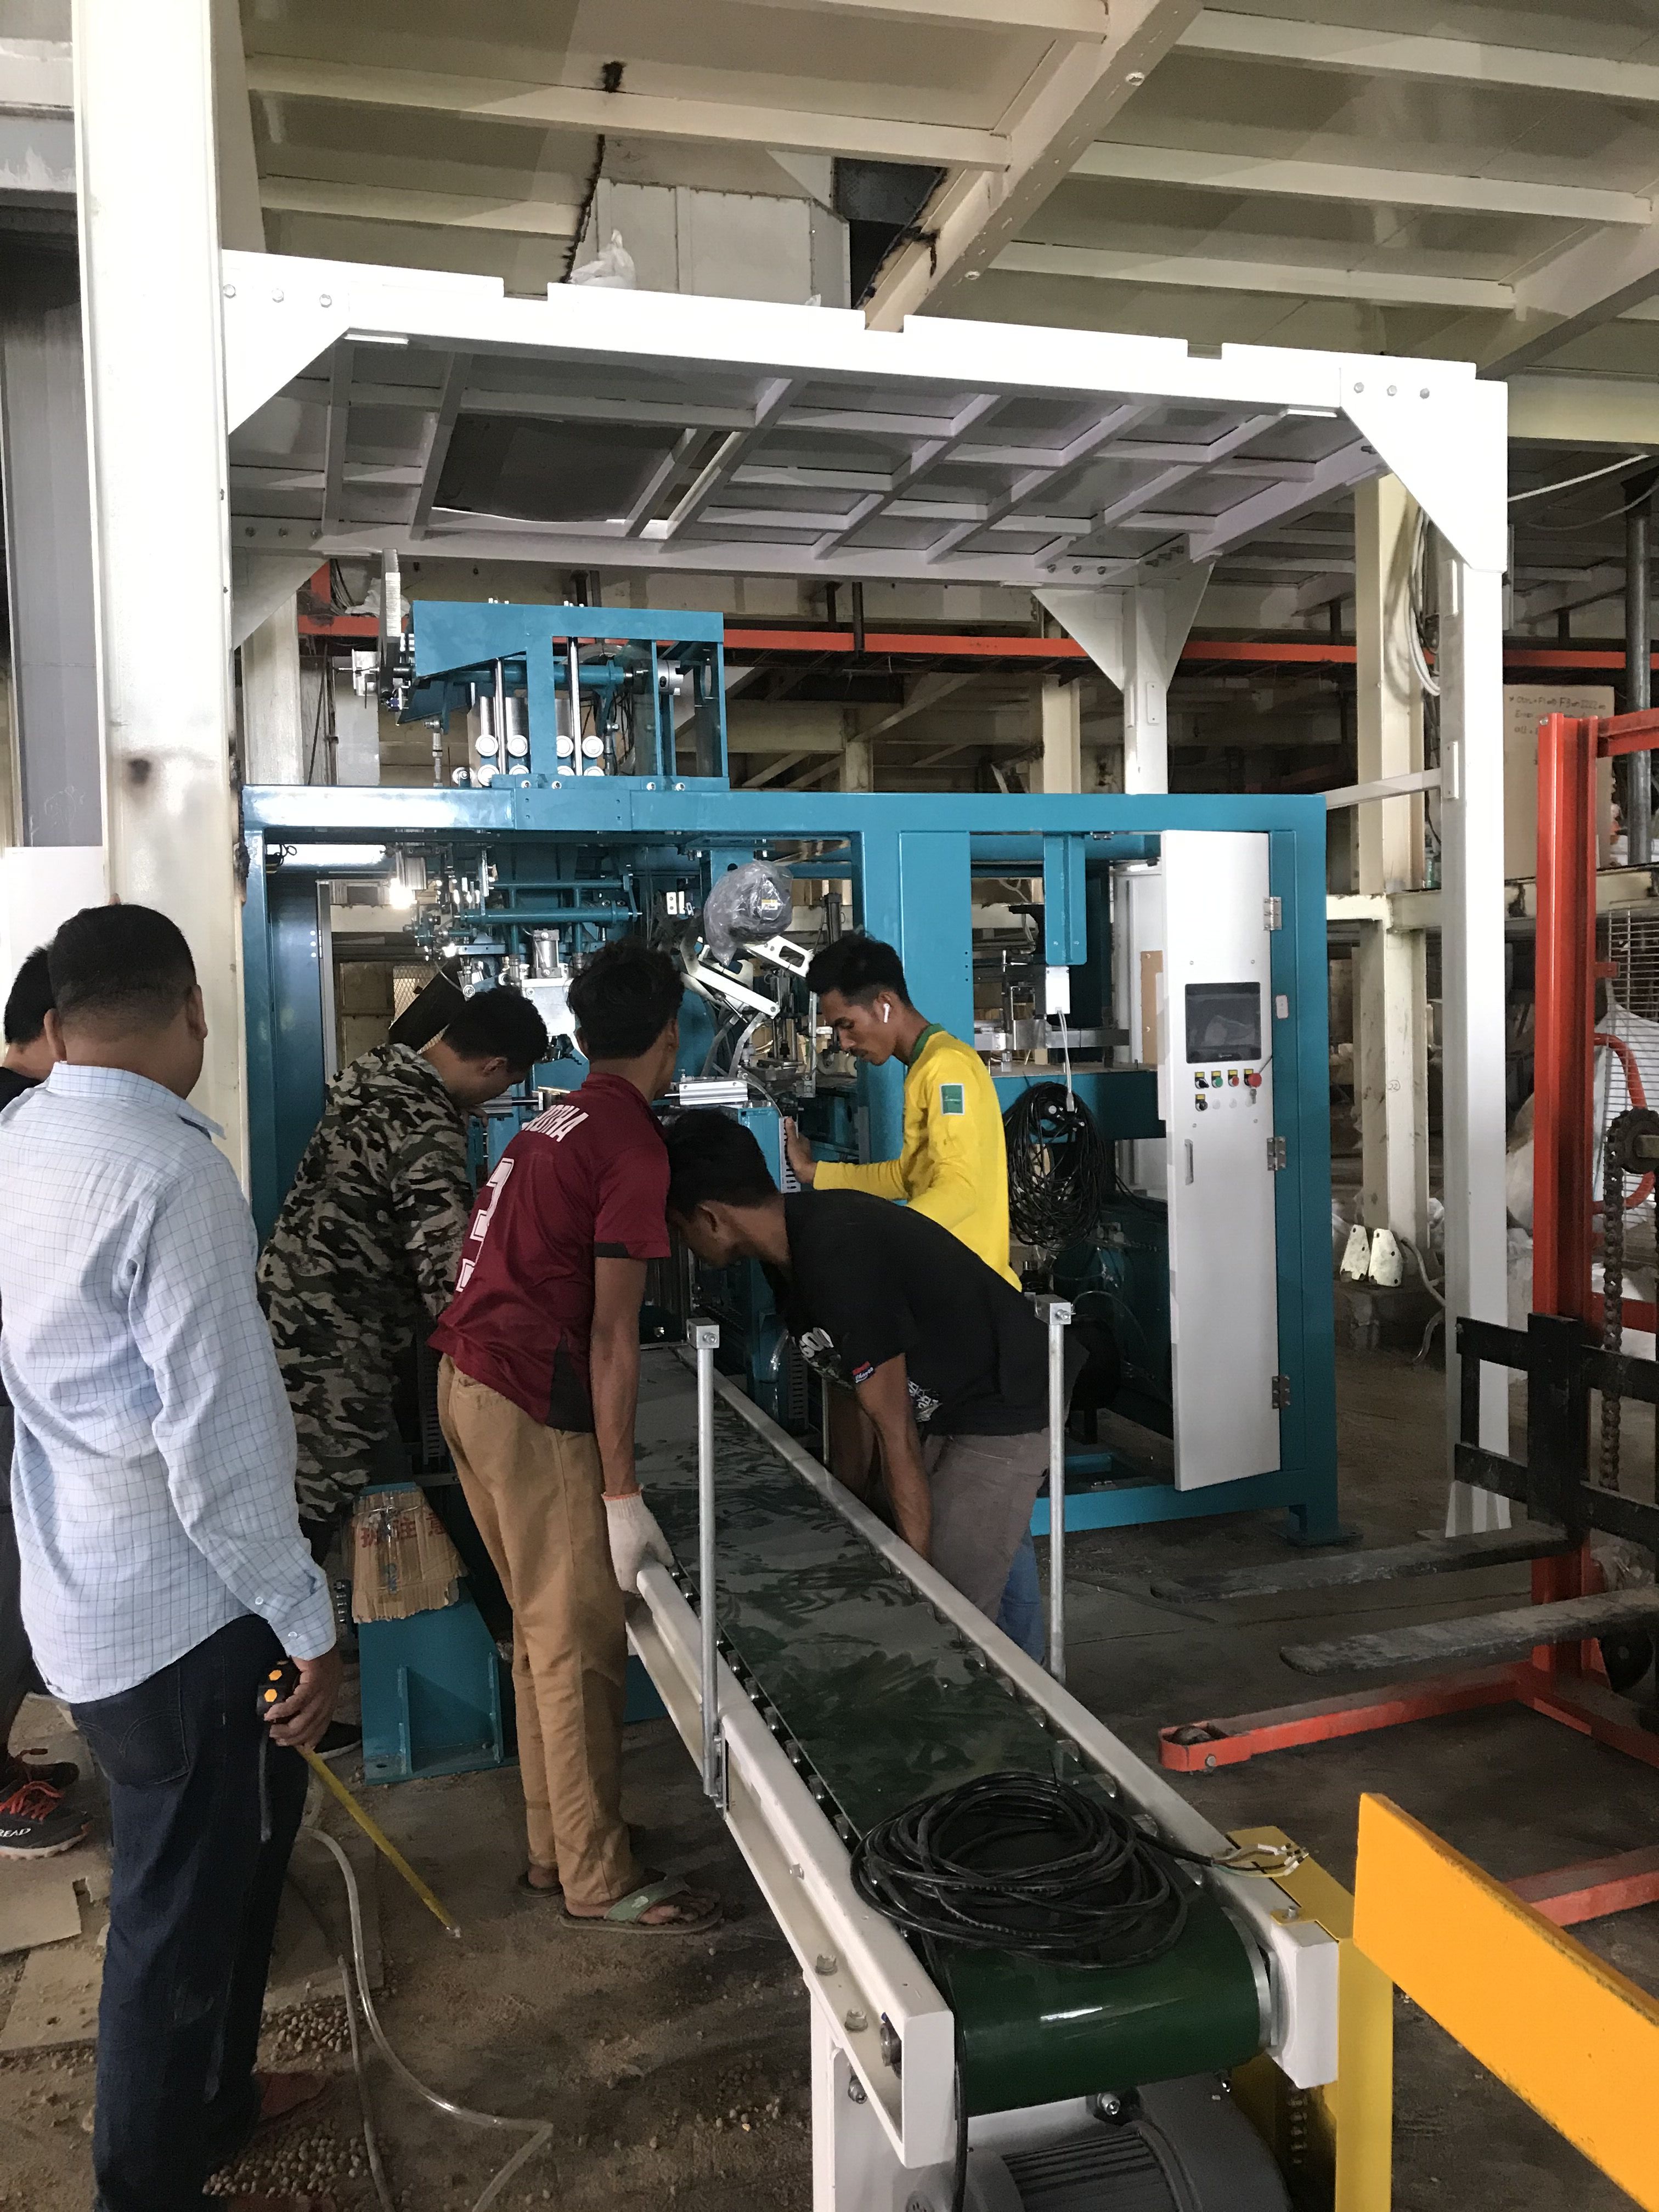 25kg granulated fertilizers Bagging machine fully automated packing line for Bagging system fully automated packing line Textured Protein Bagging Machine Packing Machine bagging palletizing system